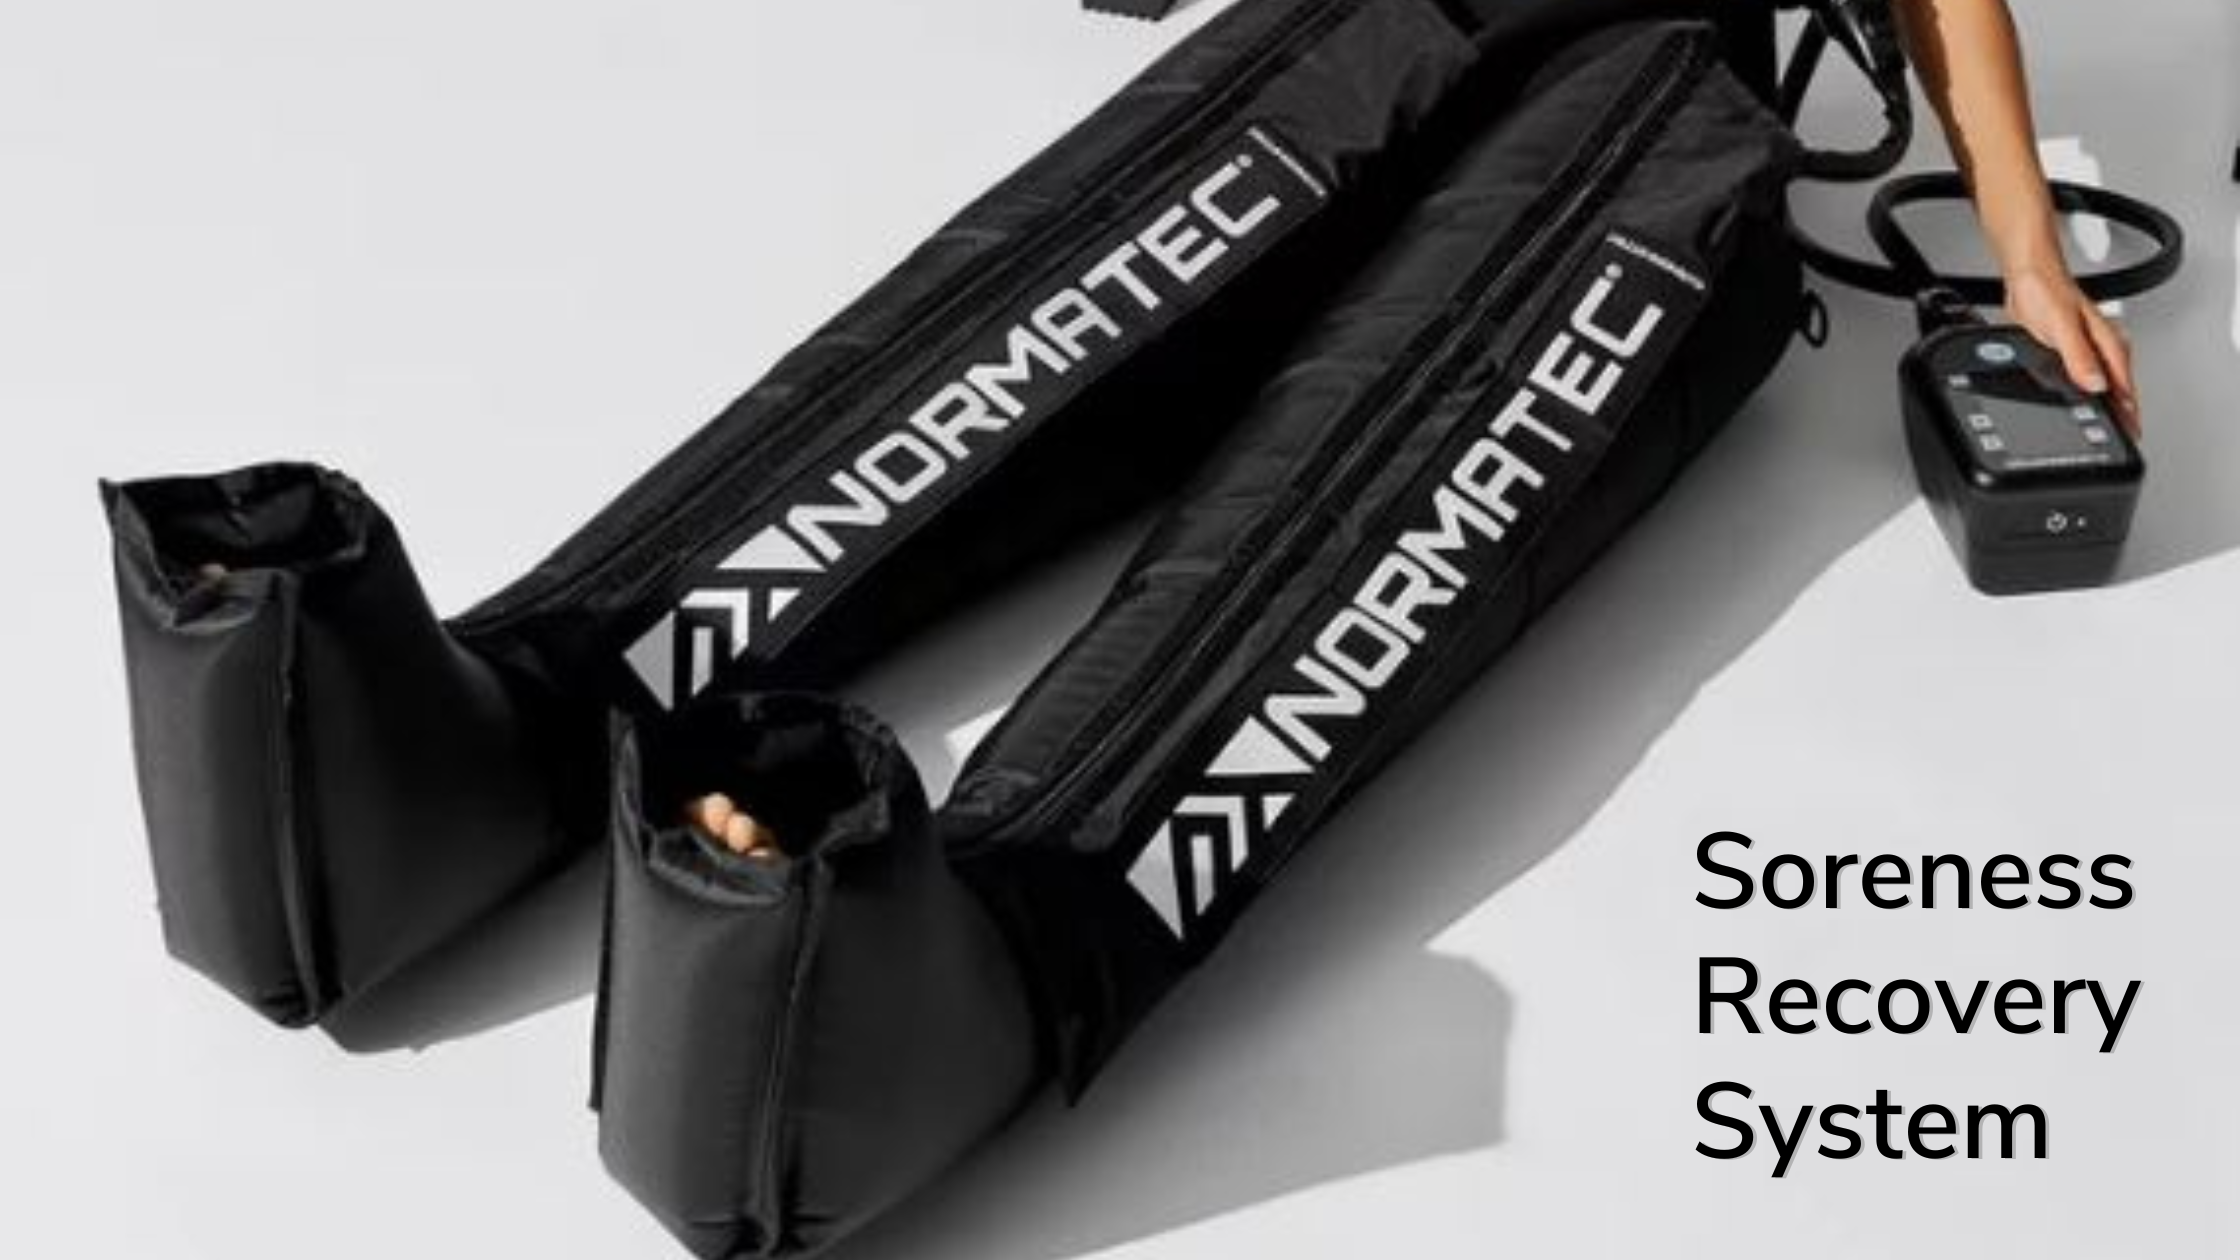 Normatec: Soreness Recovery System